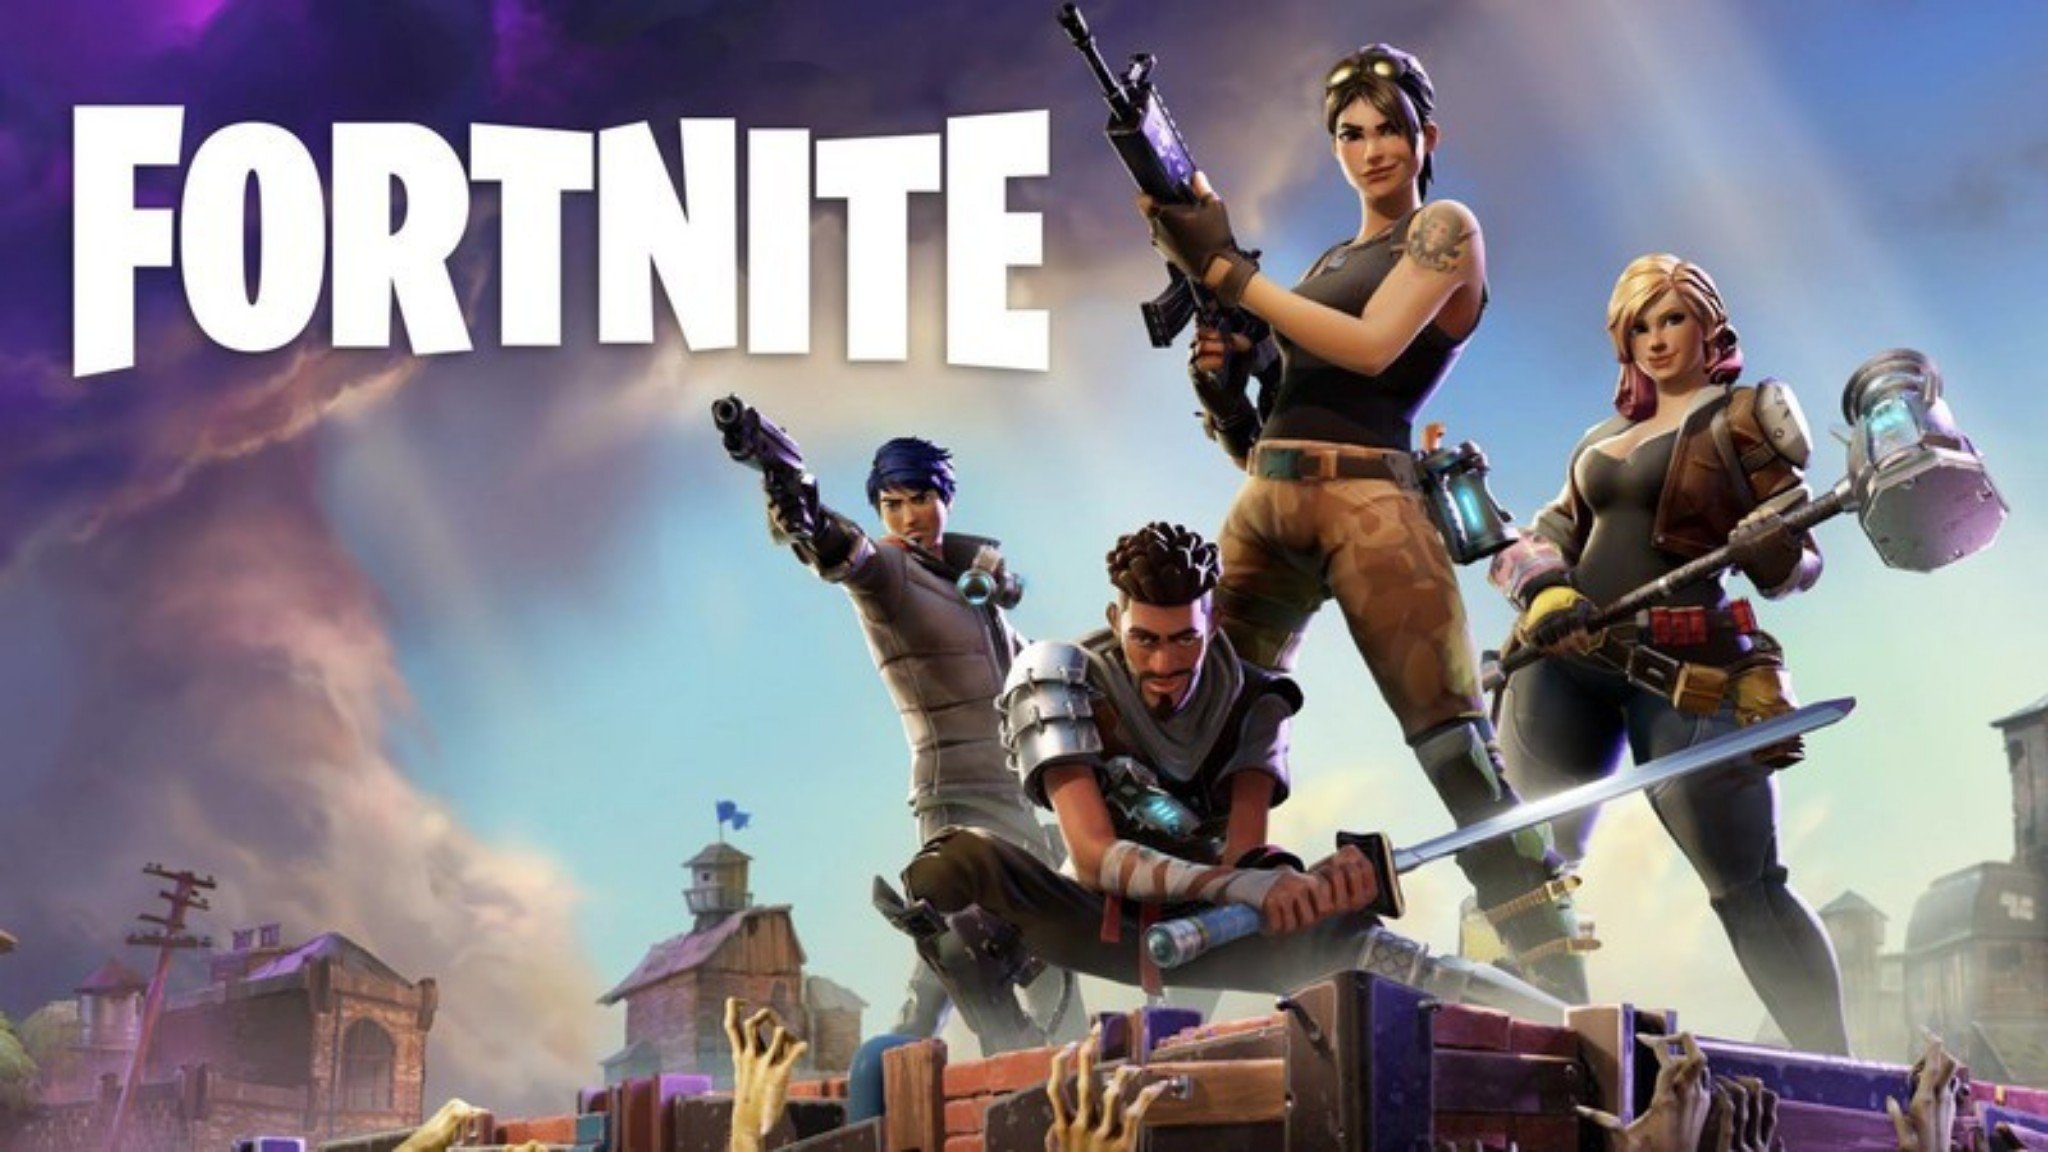 Should You Buy Fortnite For Ps4 Or Is The Free Version Good